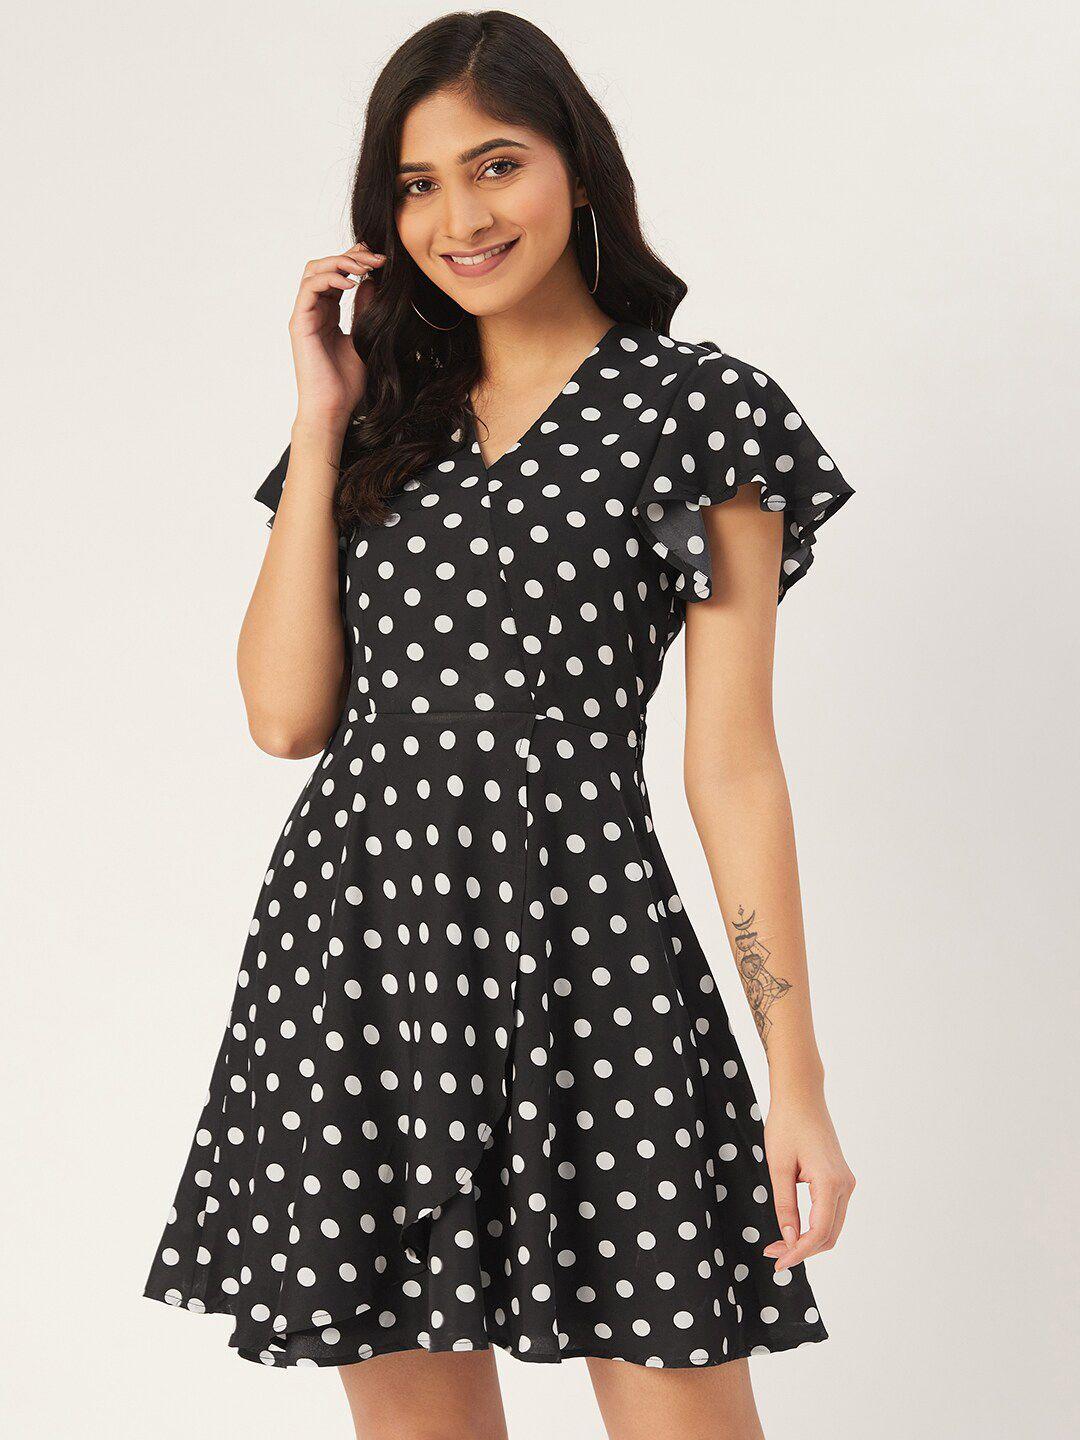 dodo & moa polka dots printed flutter sleeves fit & flare dress